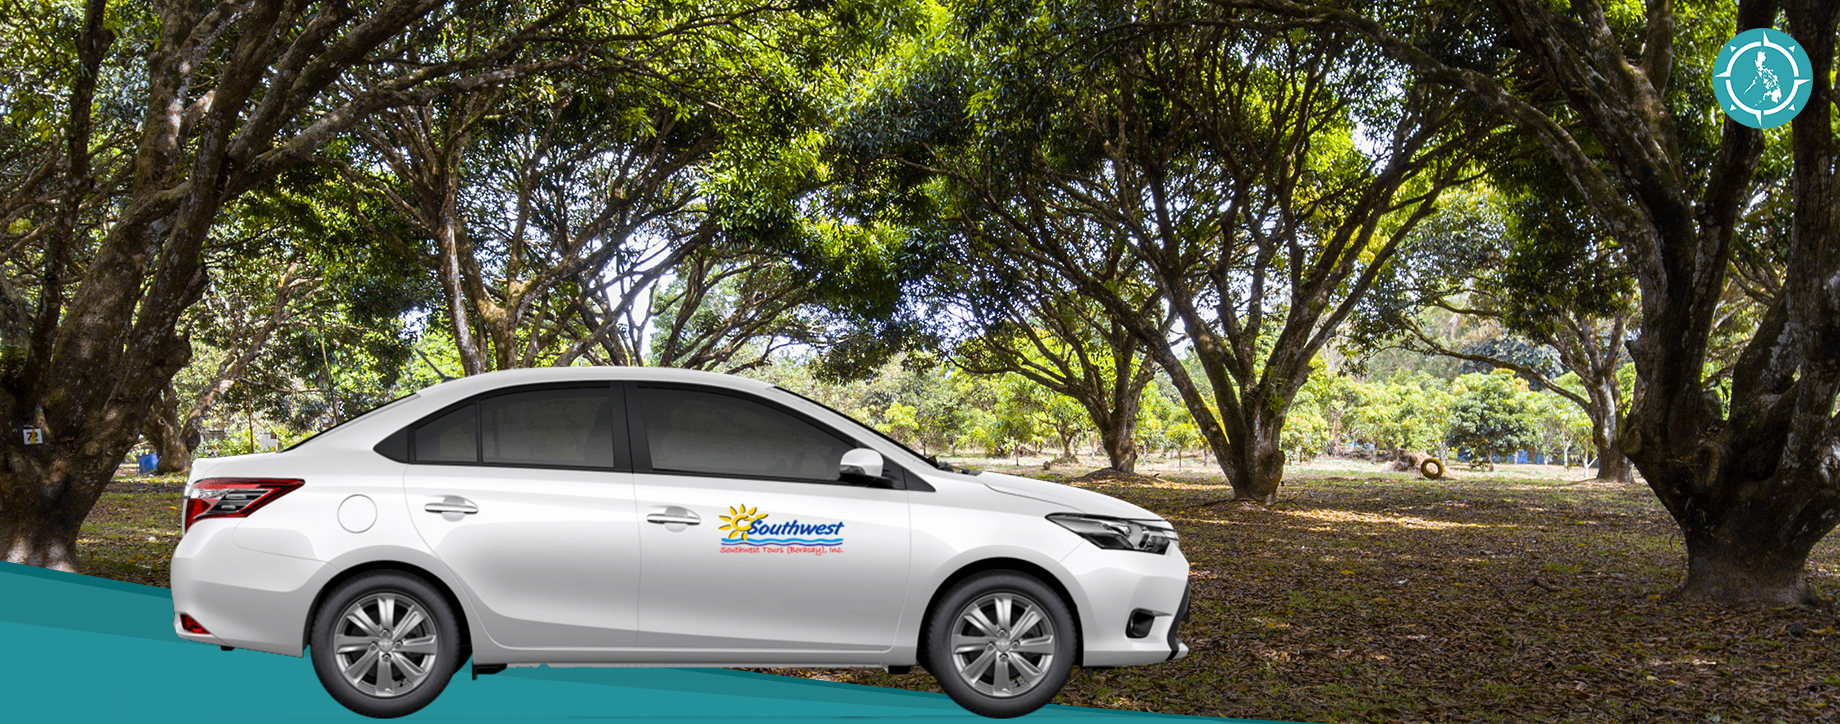 Guimaras 4-Seater Car Rental with Driver